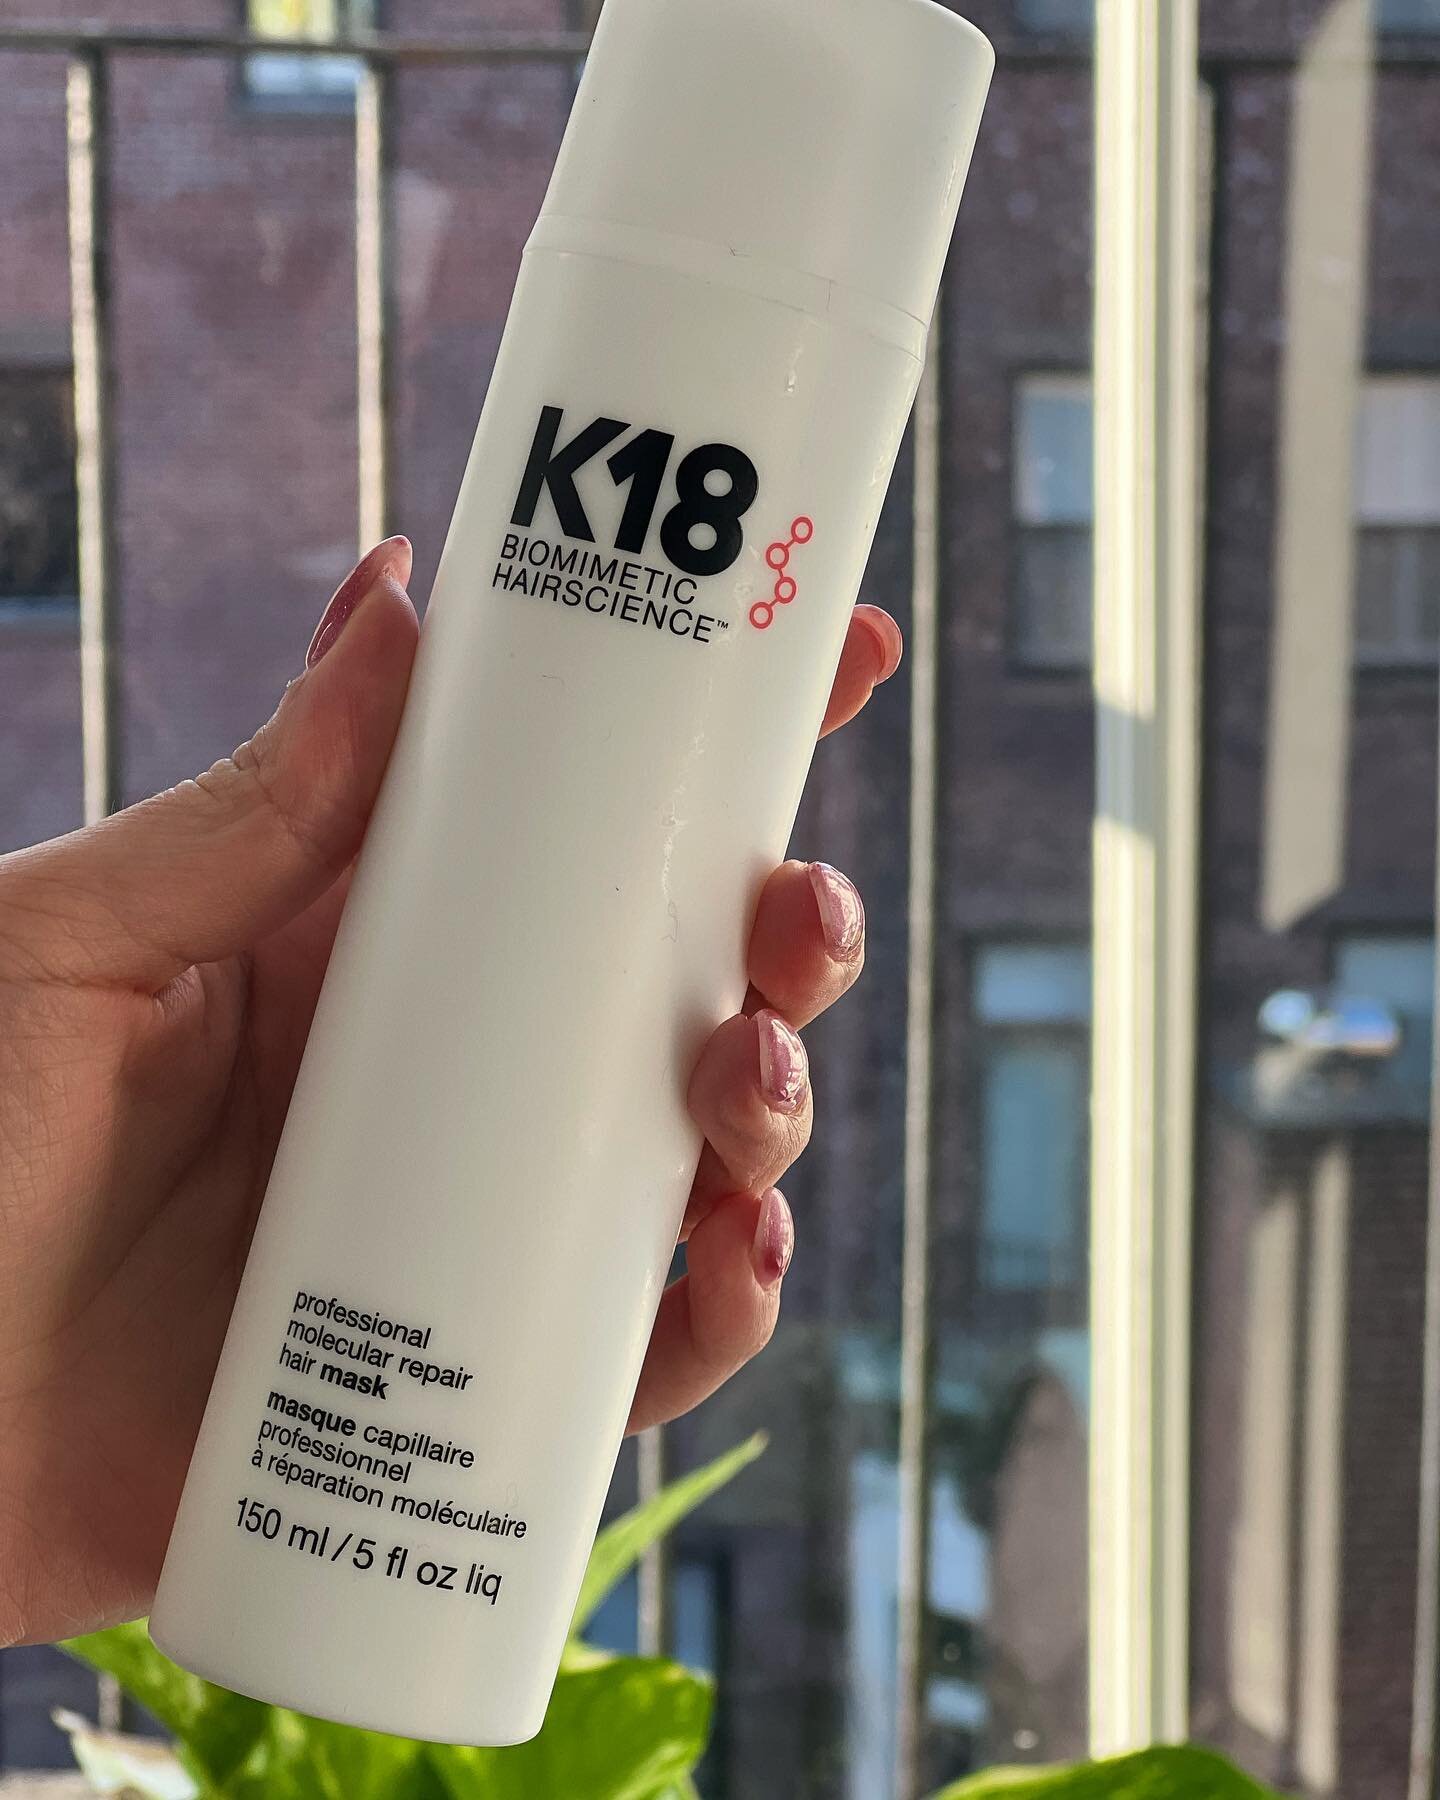 Revive your hair with K18 - the ultimate solution for damaged, over-processed hair that needs a little extra love and care. ✨